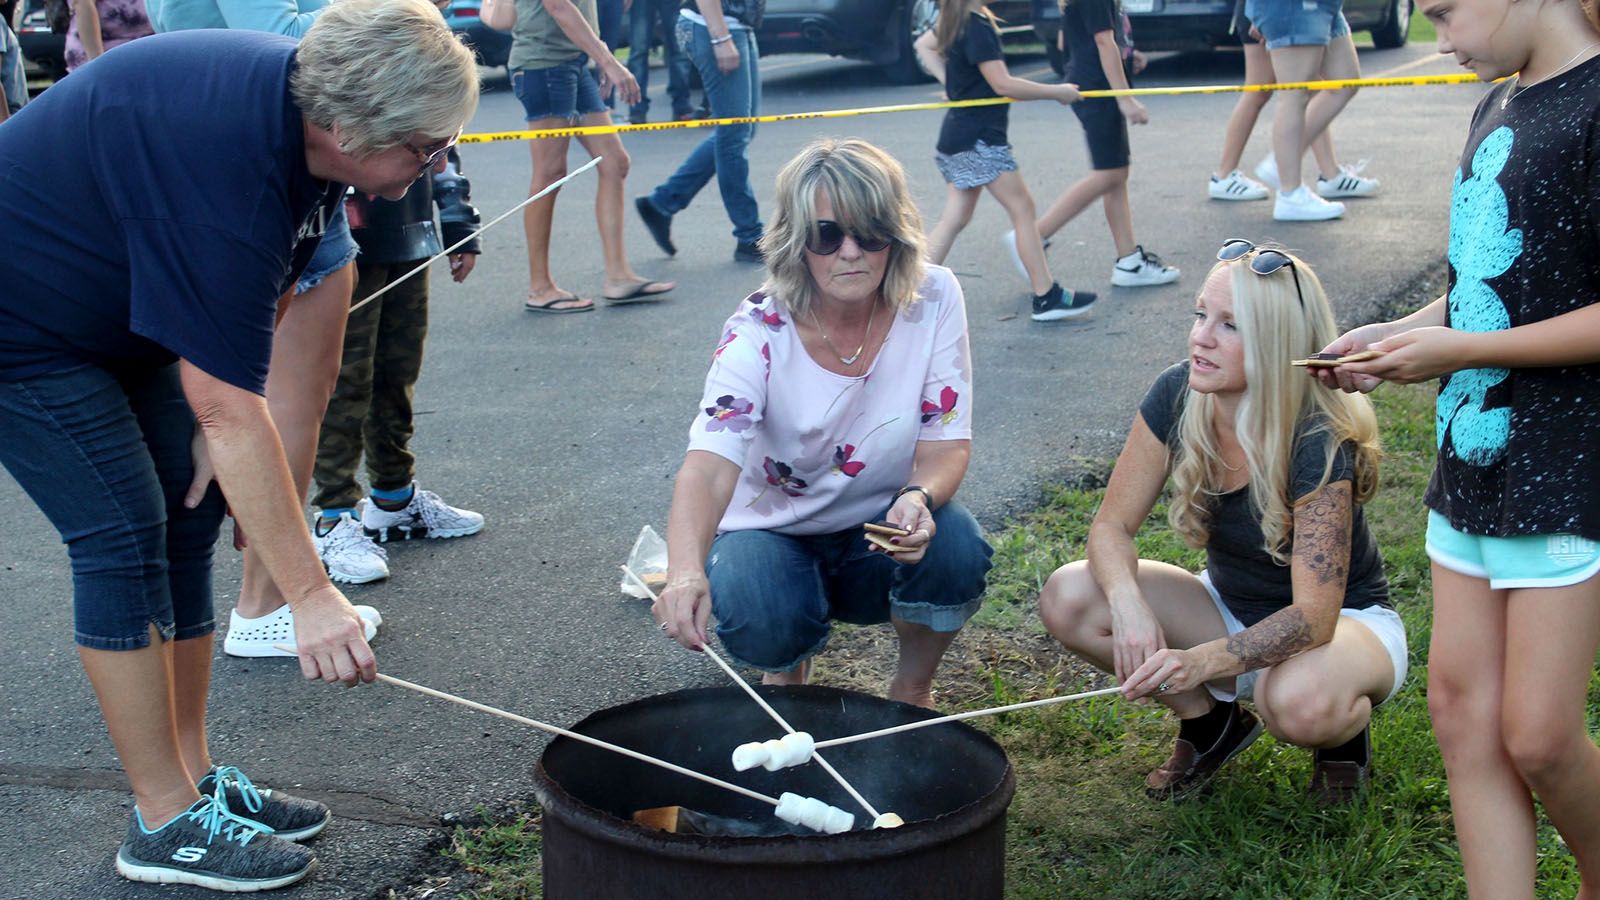 Midway rides and marshmallows abound during the Marshmallow Festival in Ligonier from Friday-Monday, Sept. 1-4.